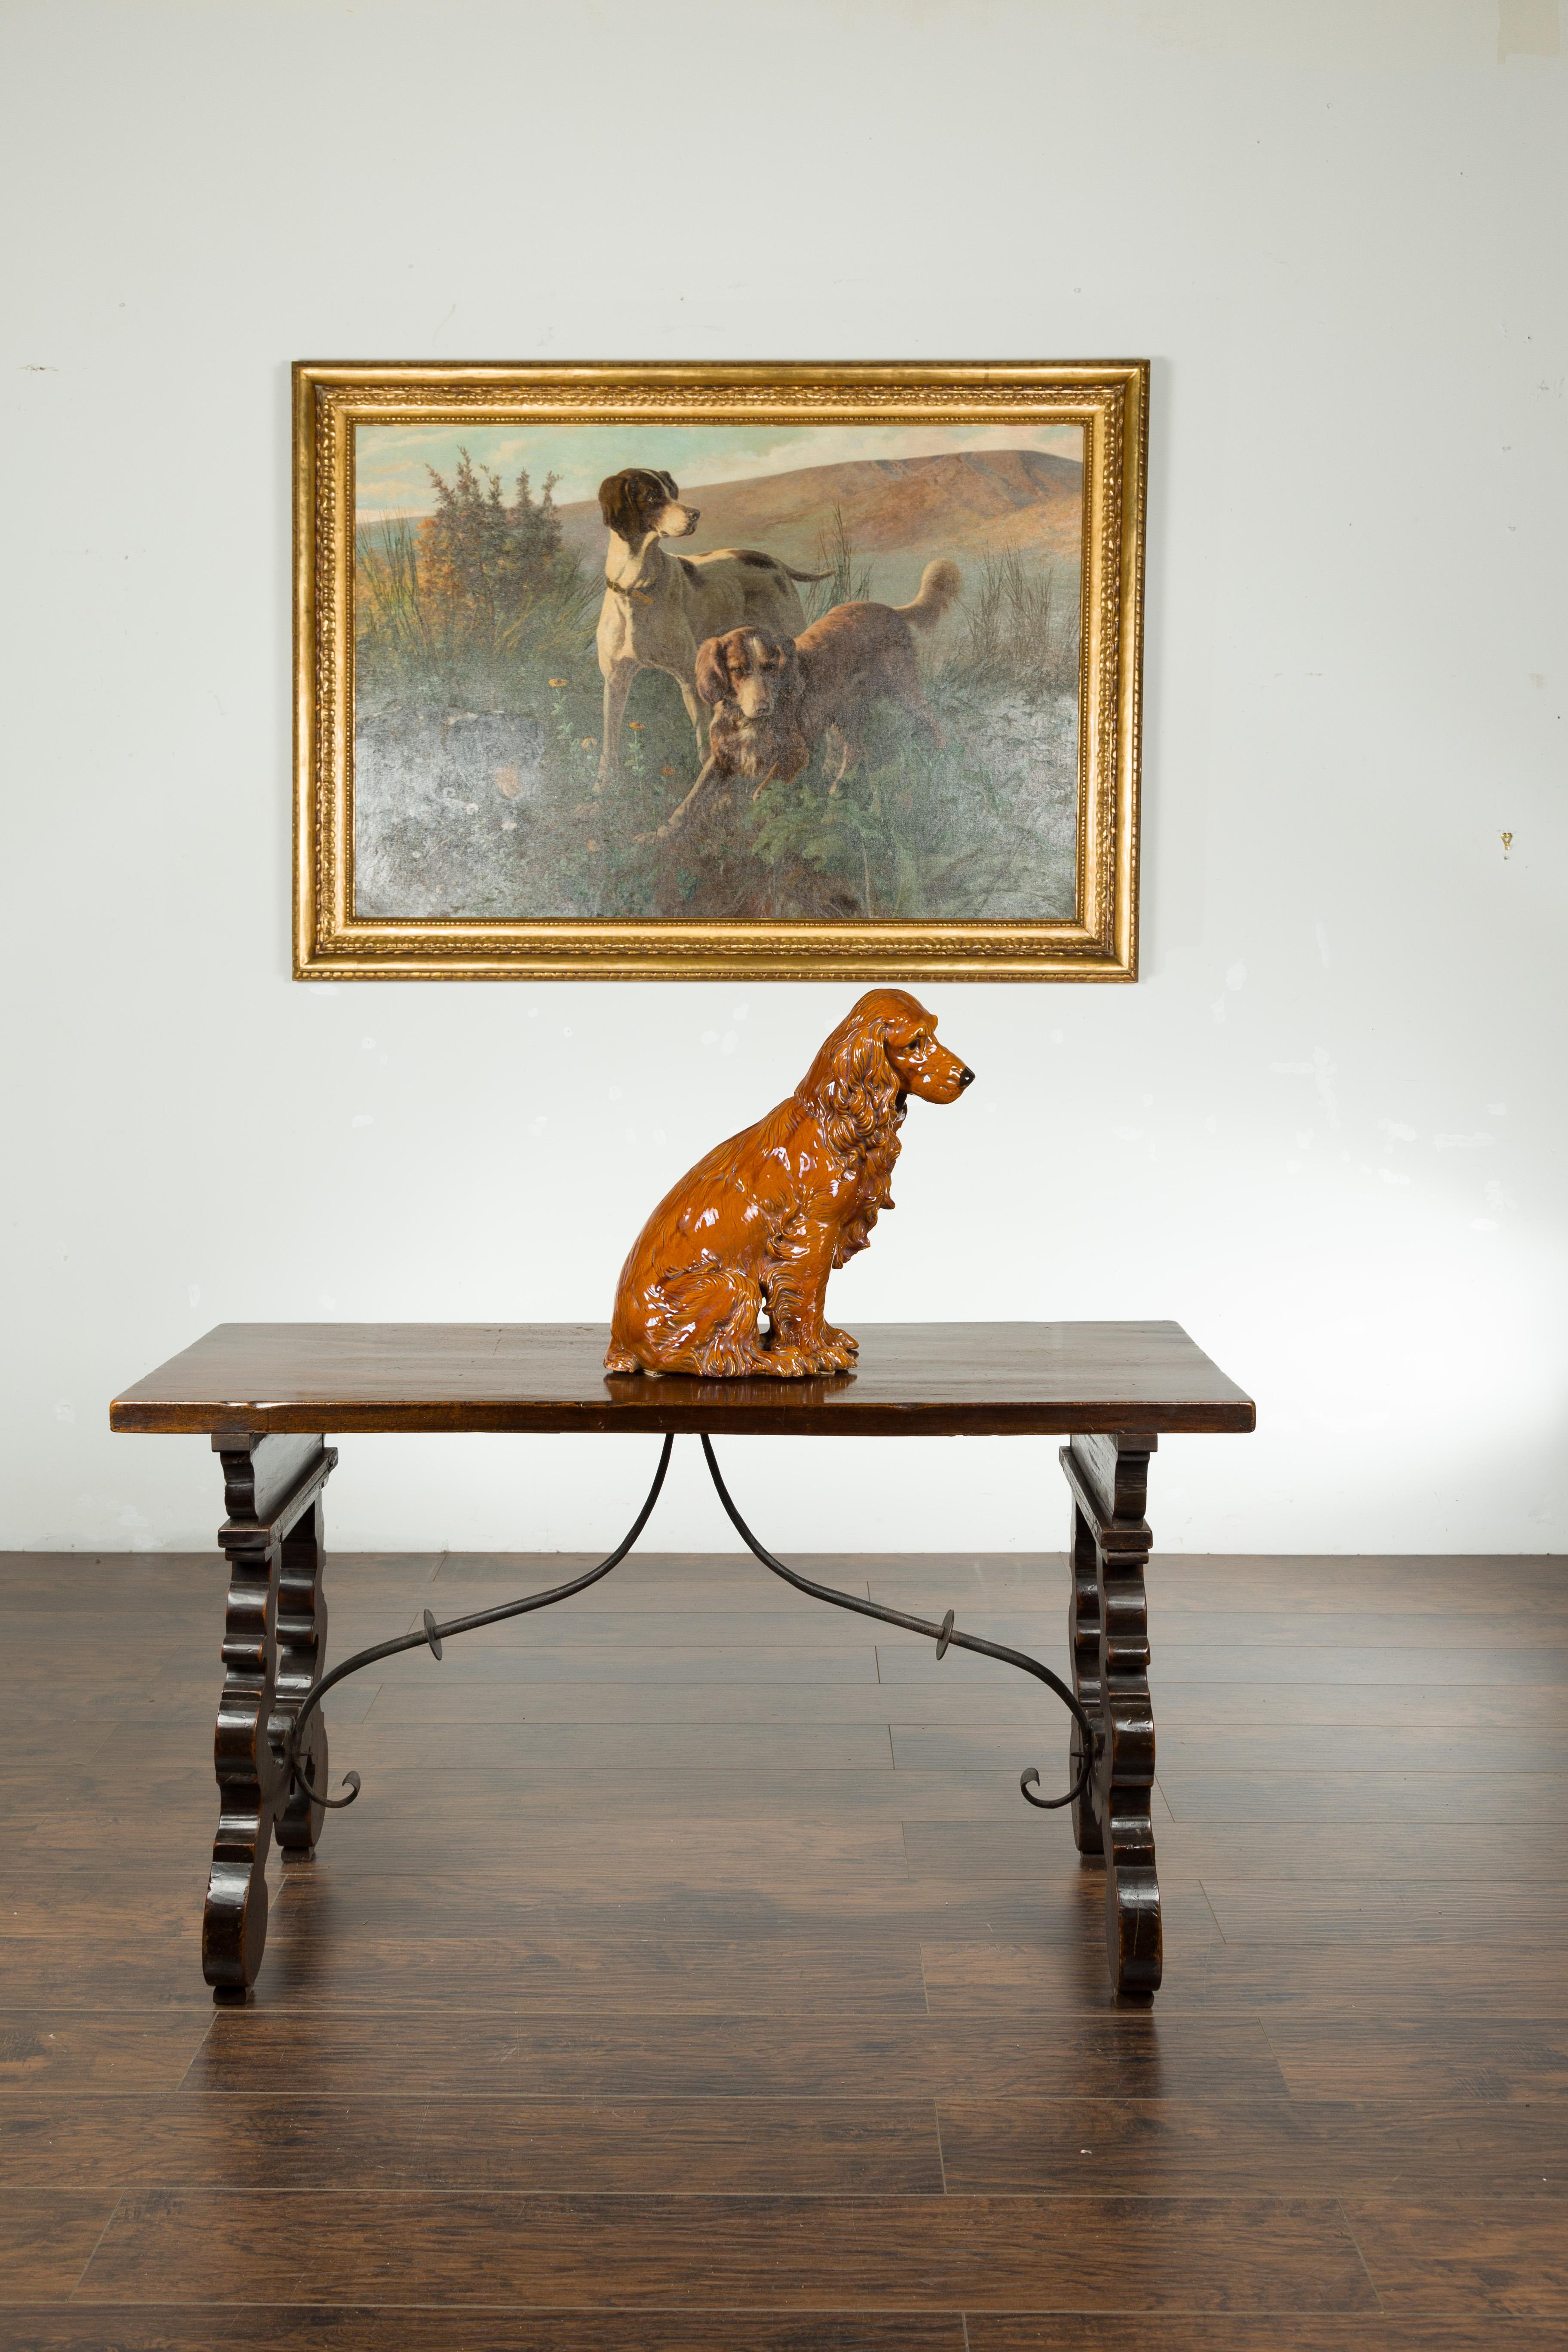 A vintage glazed terracotta dog sculpture from the mid 20th century, depicting a sitting cocker spaniel. Created during the midcentury period, this glazed terracotta piece depicts a cocker spaniel sitting obediently on his behind. Tilting his head